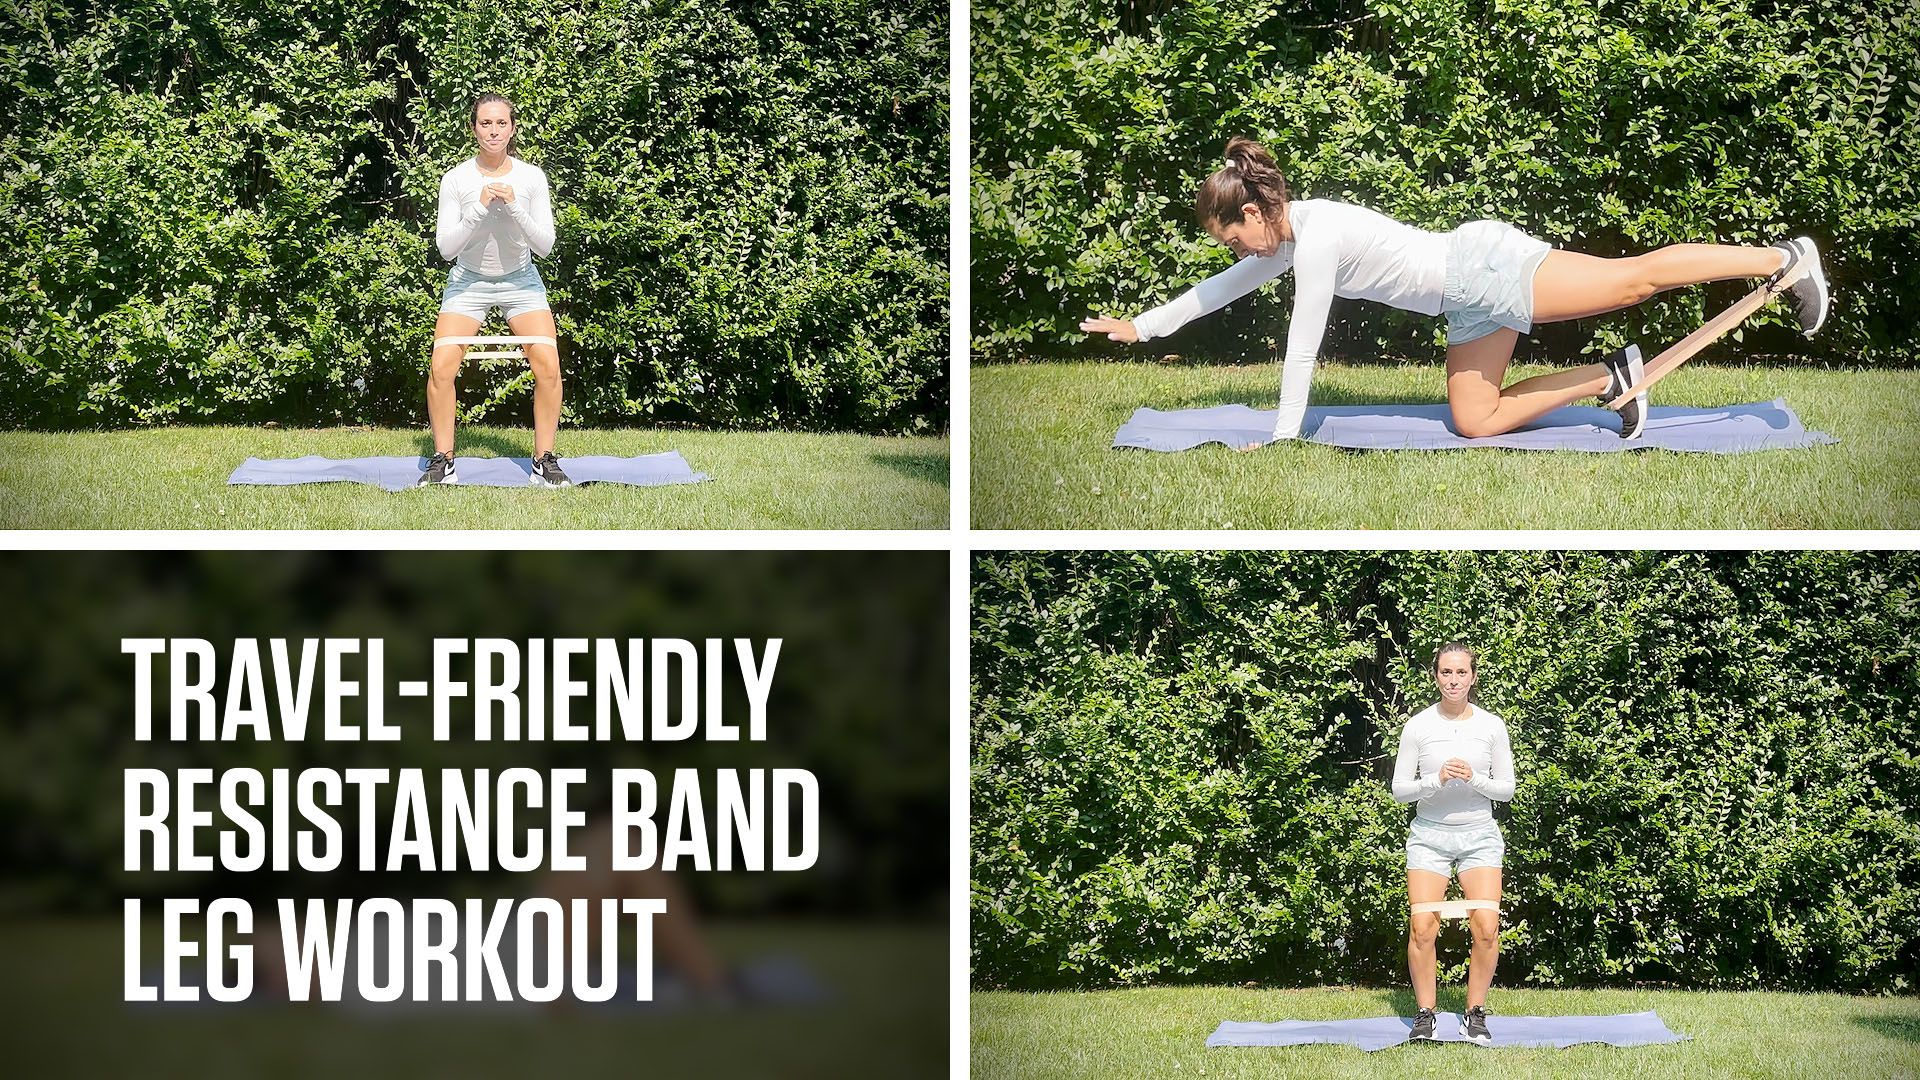 Resistance Bands For Legs: 5 Effective Exercises